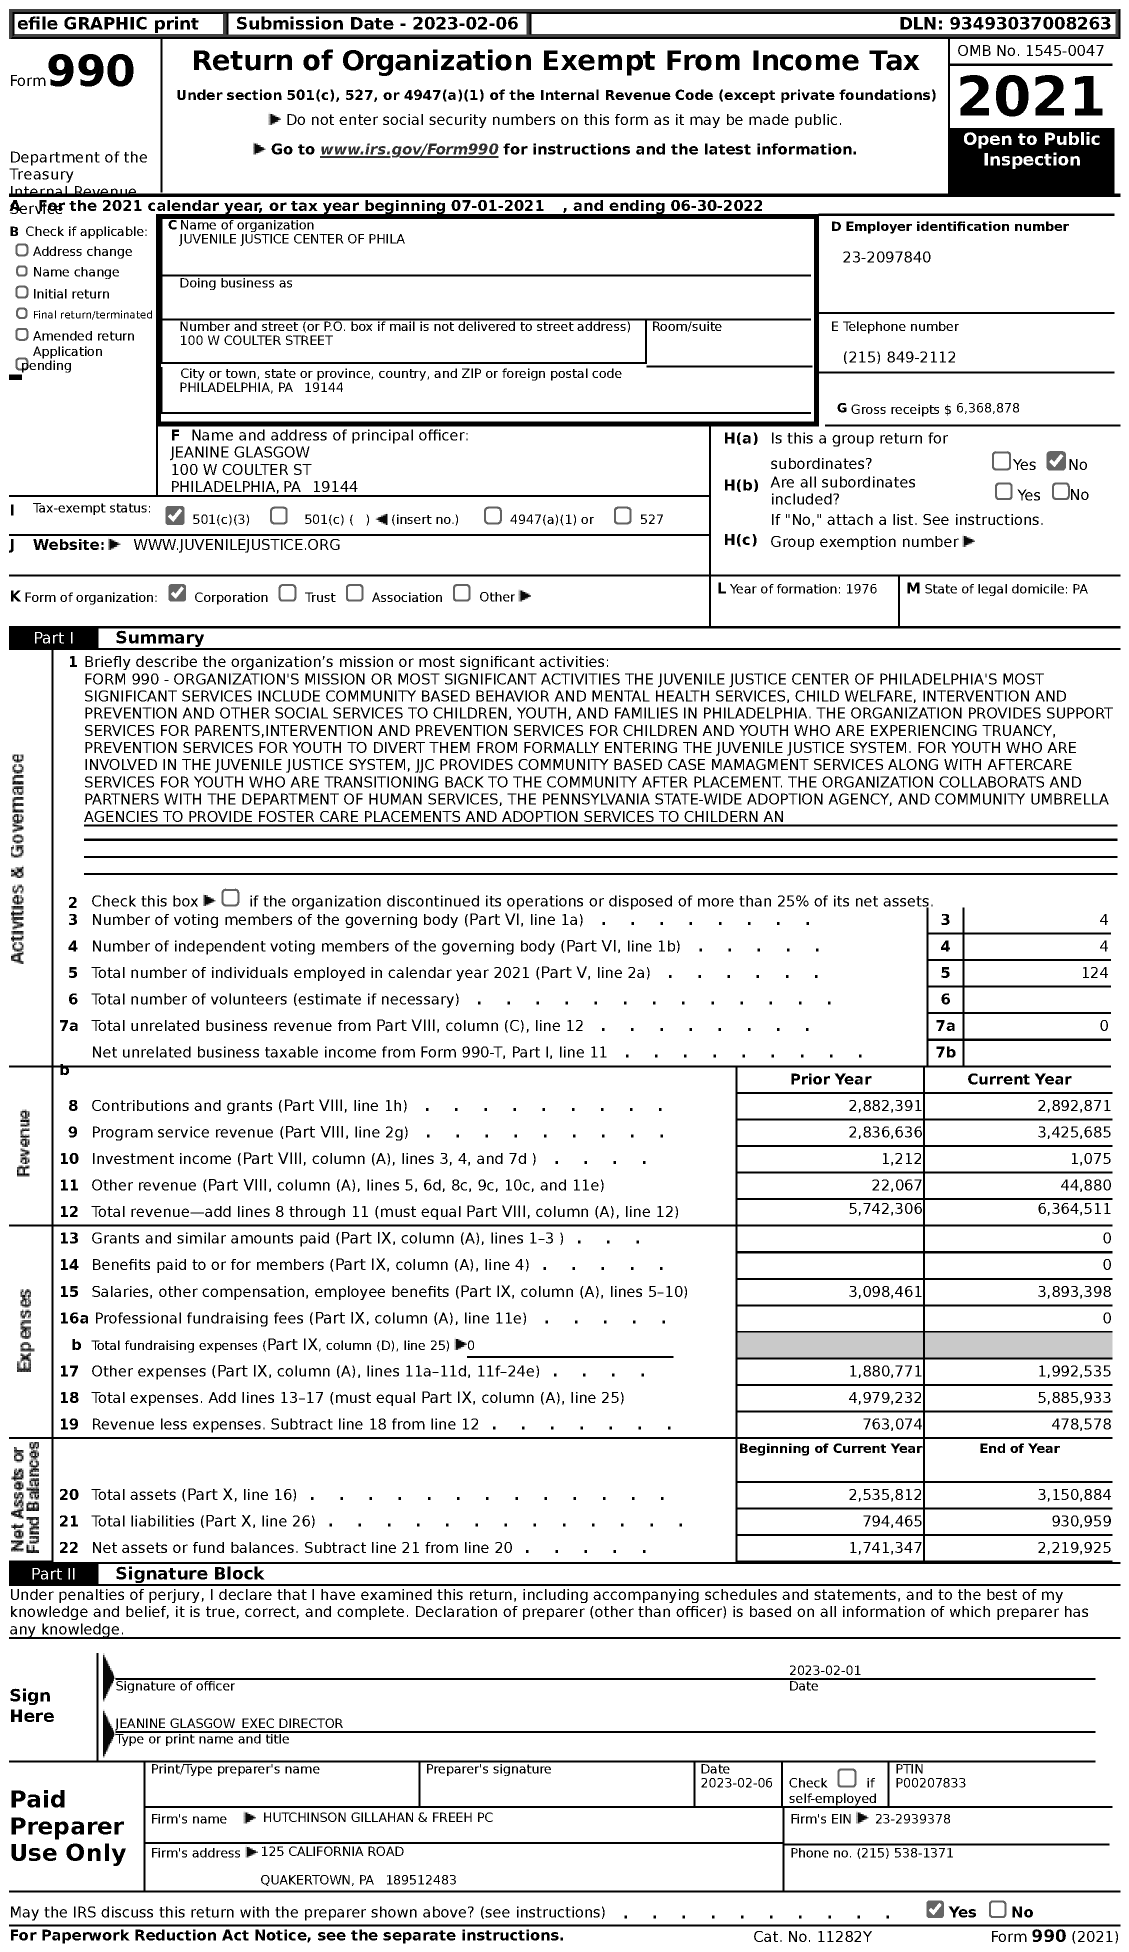 Image of first page of 2021 Form 990 for Juvenile Justice Center of Philadelphia (JJC)